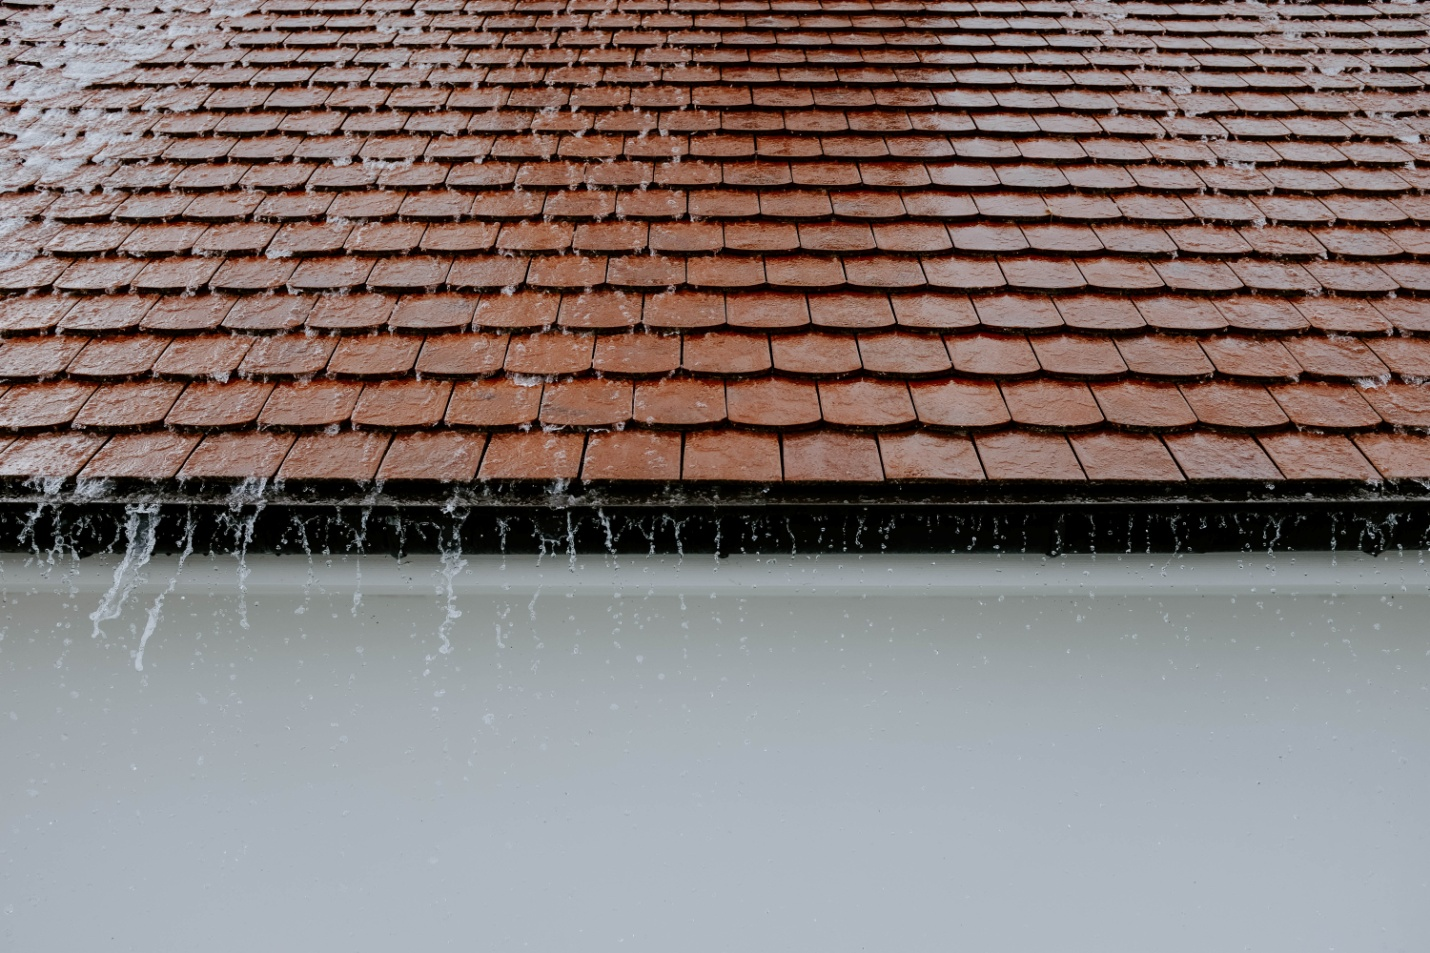 A close-up of a tile roof while raining